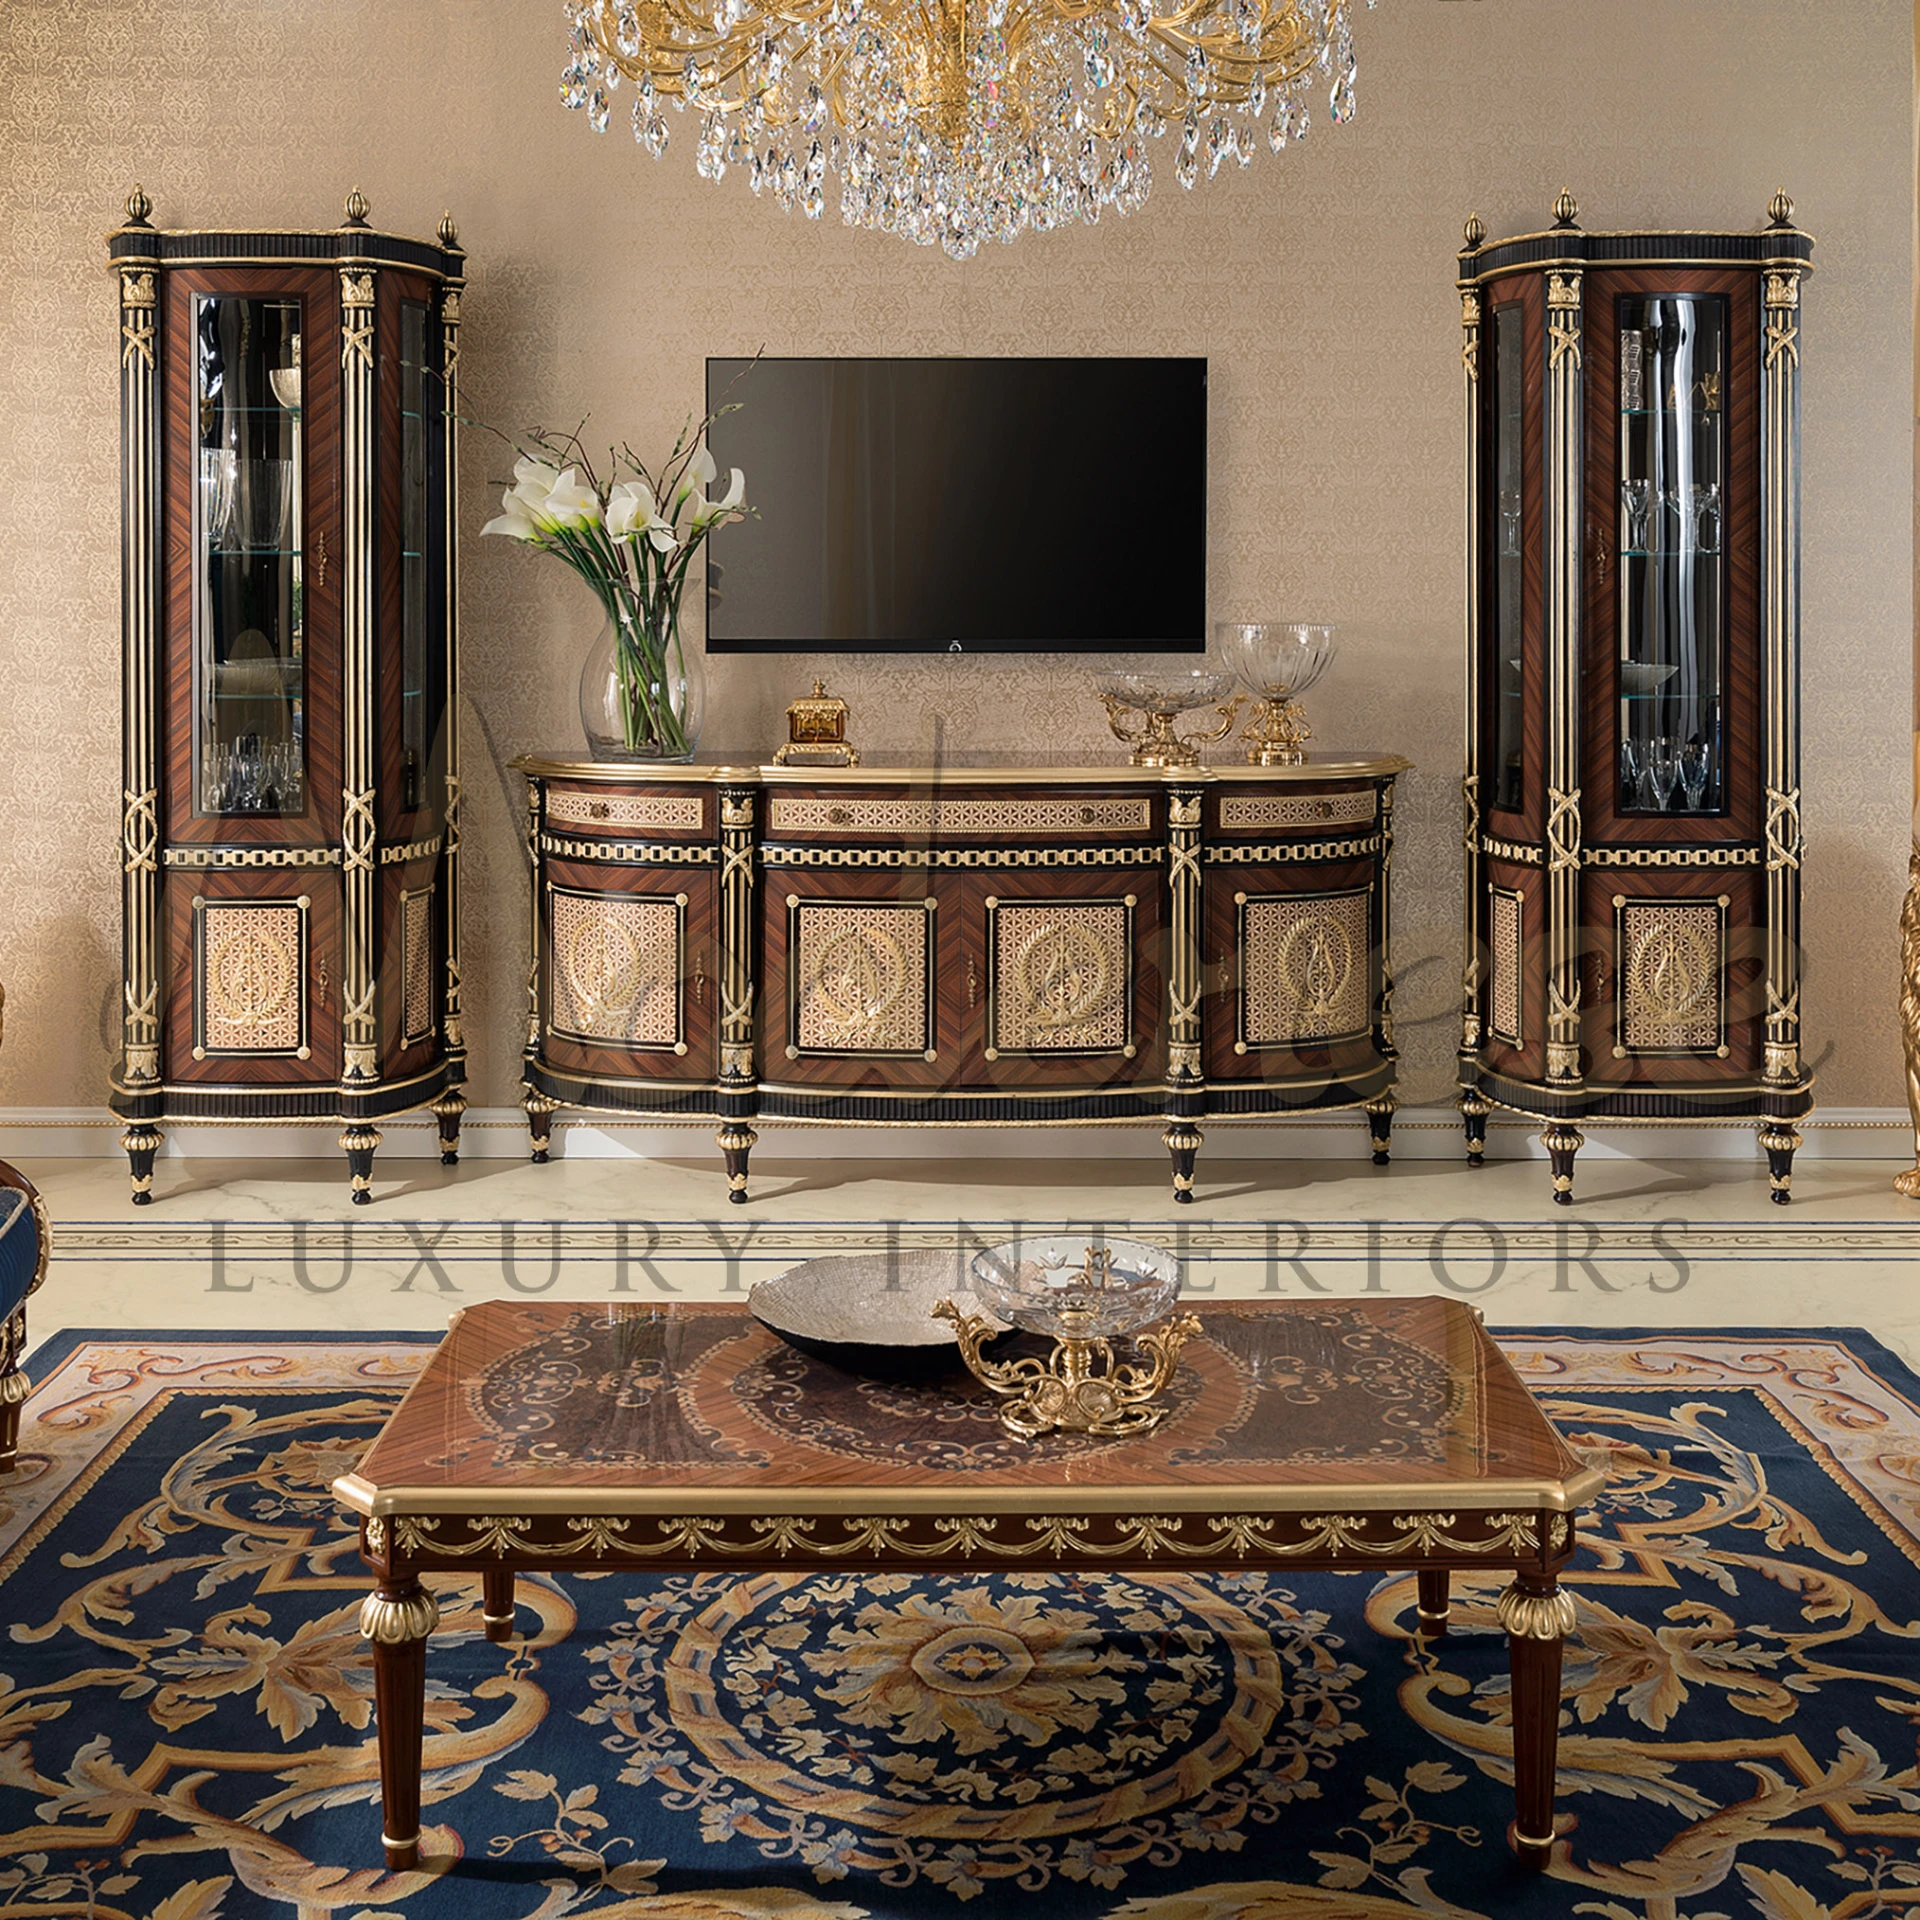 Crafted with care, featuring bespoke wooden elements and a stunning marquetry table top. Representing the essence of Modenese Furniture's craftsmanship.